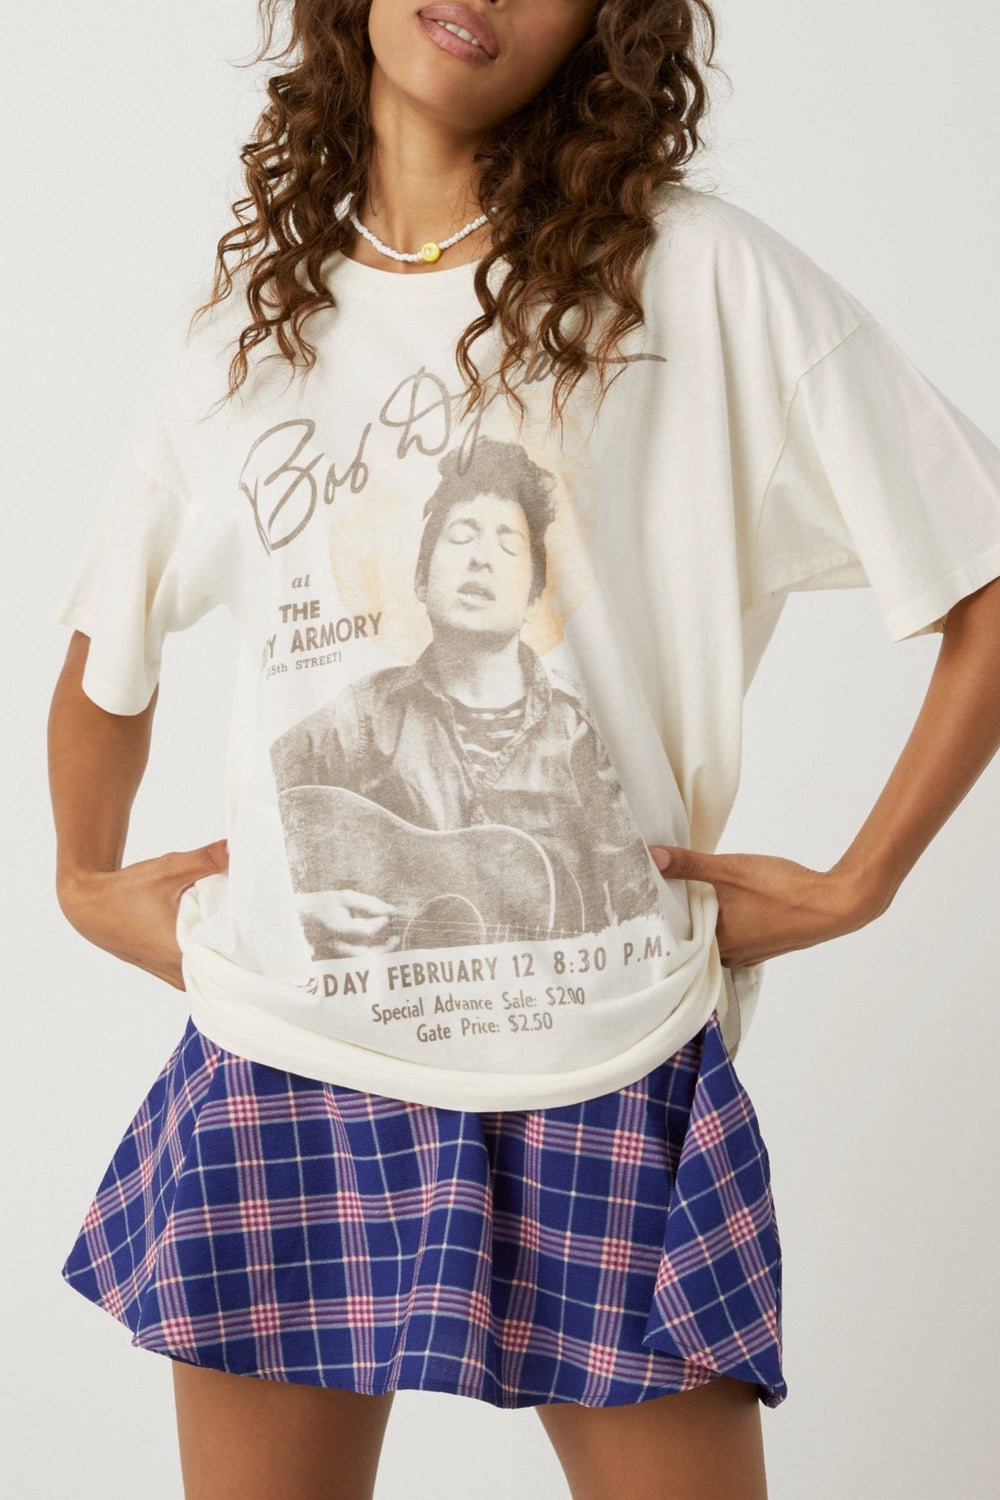 Bob Dylan At The Troy Armory Merch Tee